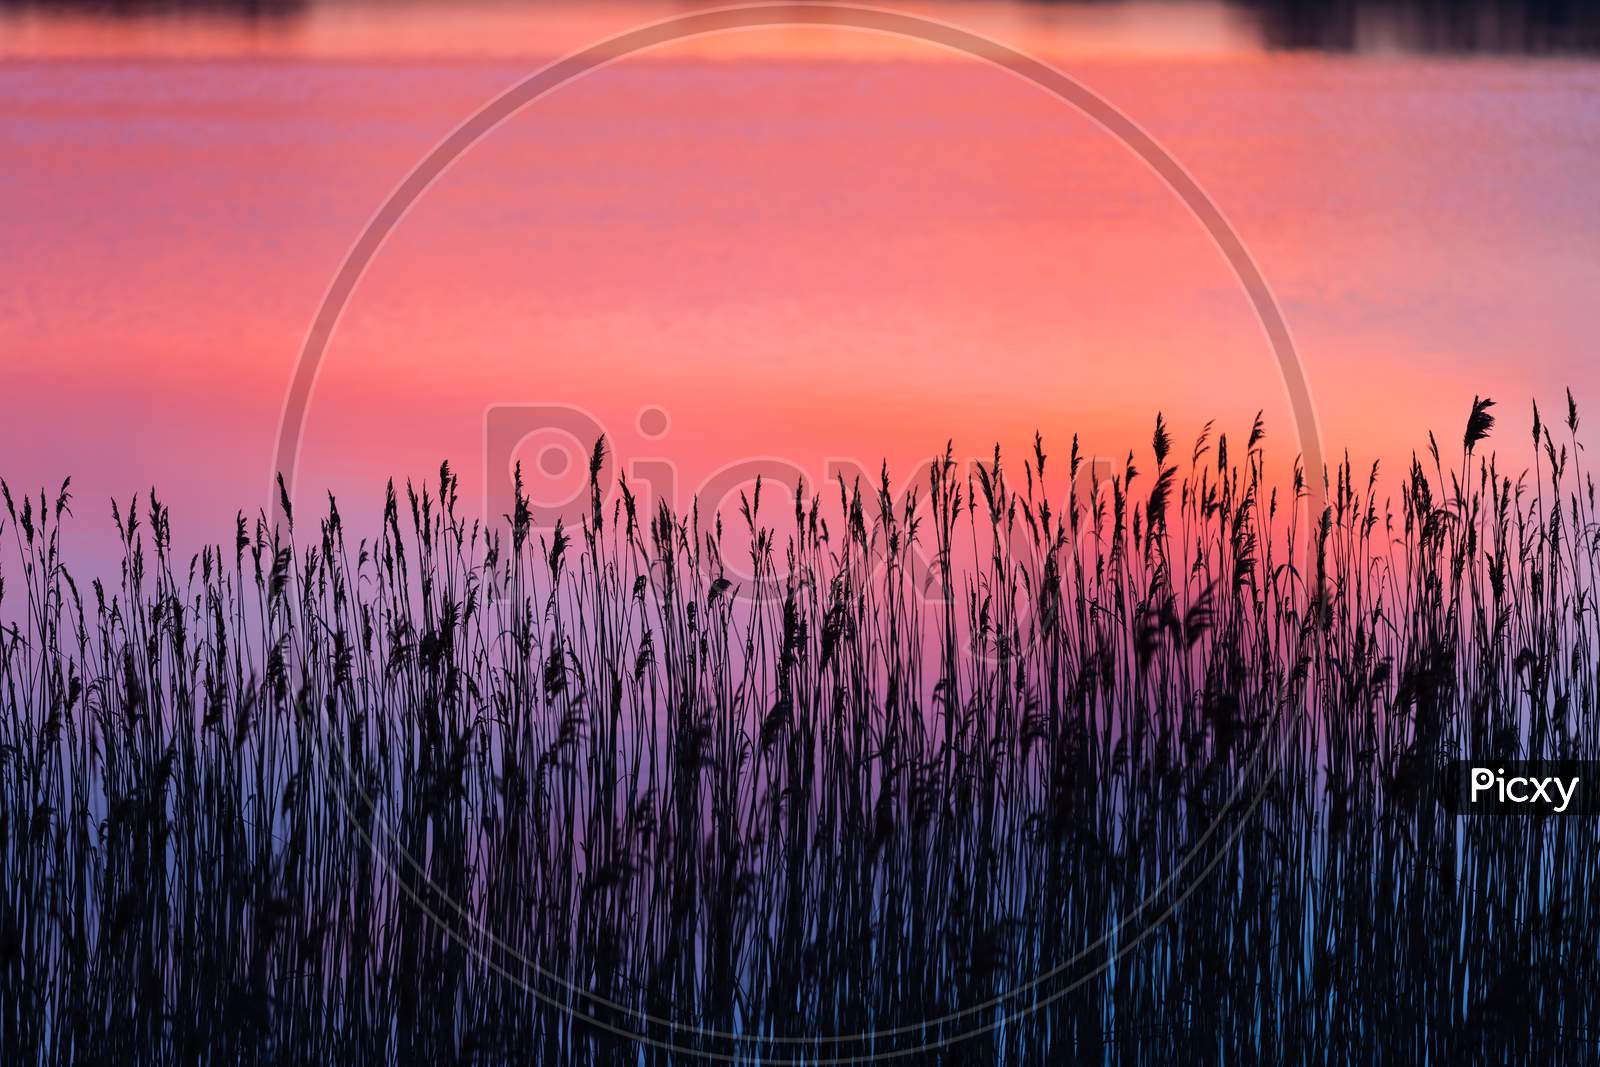 Beautiful Lake With Colorful Sunset Sky Refected In Water. Tranquil Vibrant Landscape